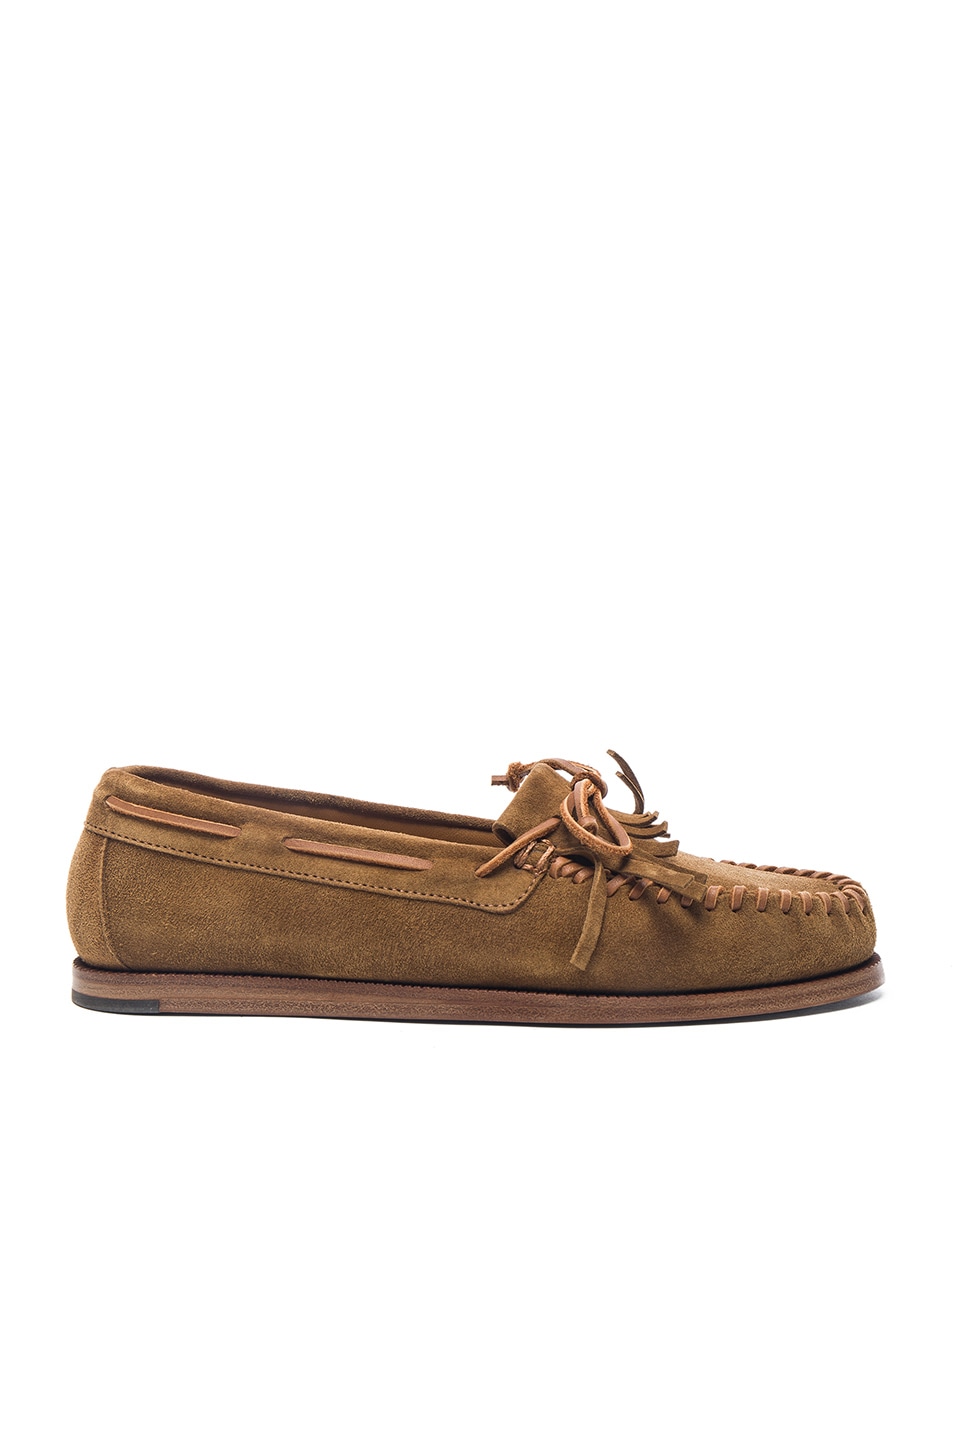 Image 1 of Saint Laurent Suede Indian Moccasins in Tan